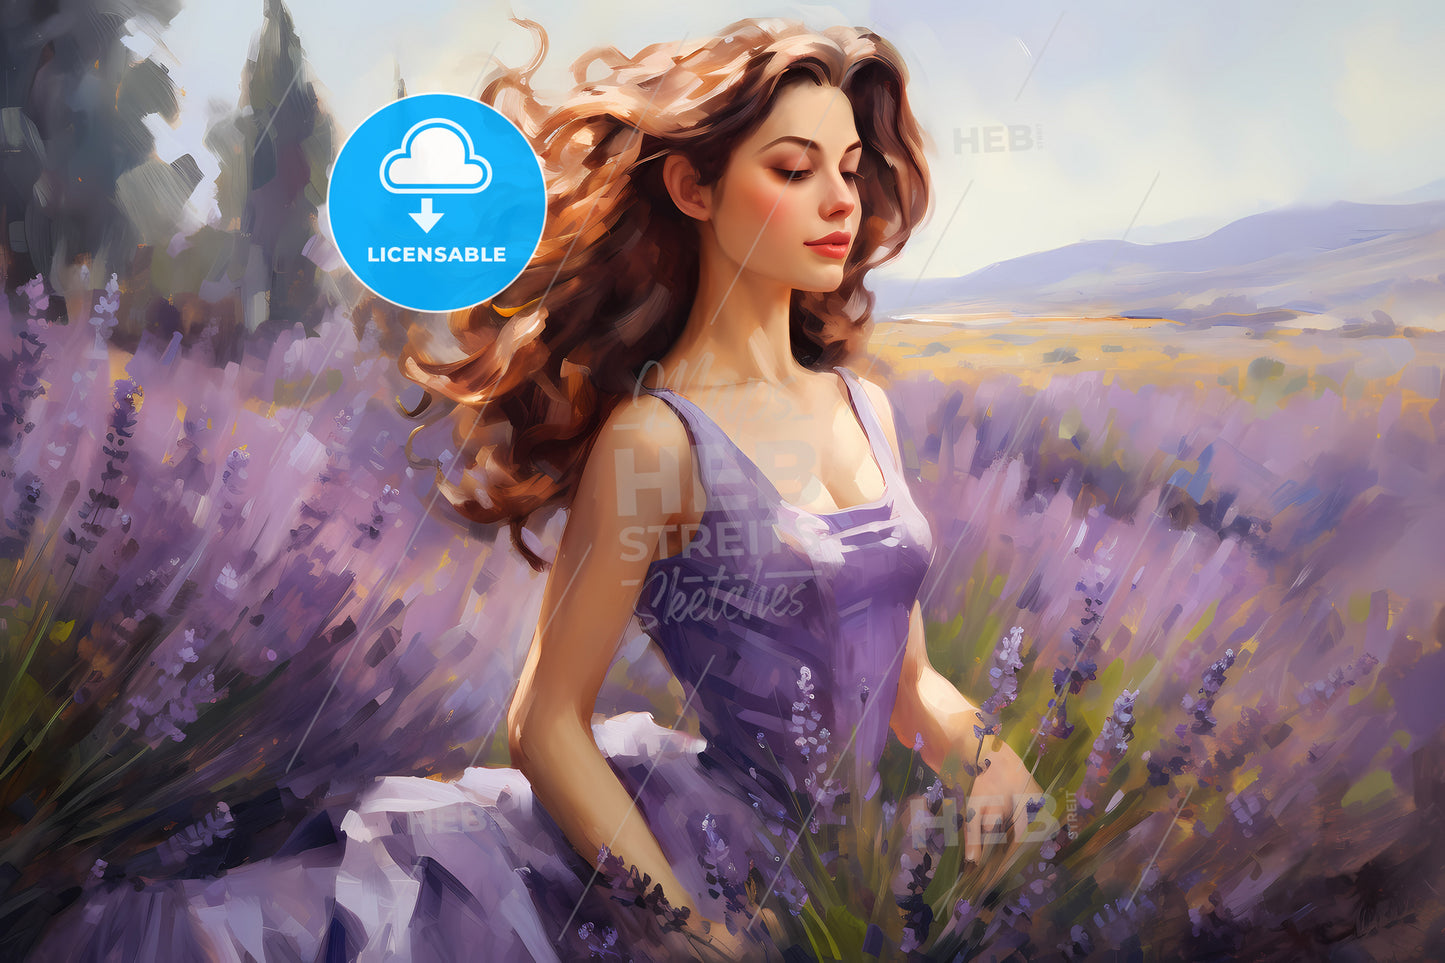 Lavender Oil In Oils In The Style Of Feminine Sensibilities, A Woman In A Lavender Field